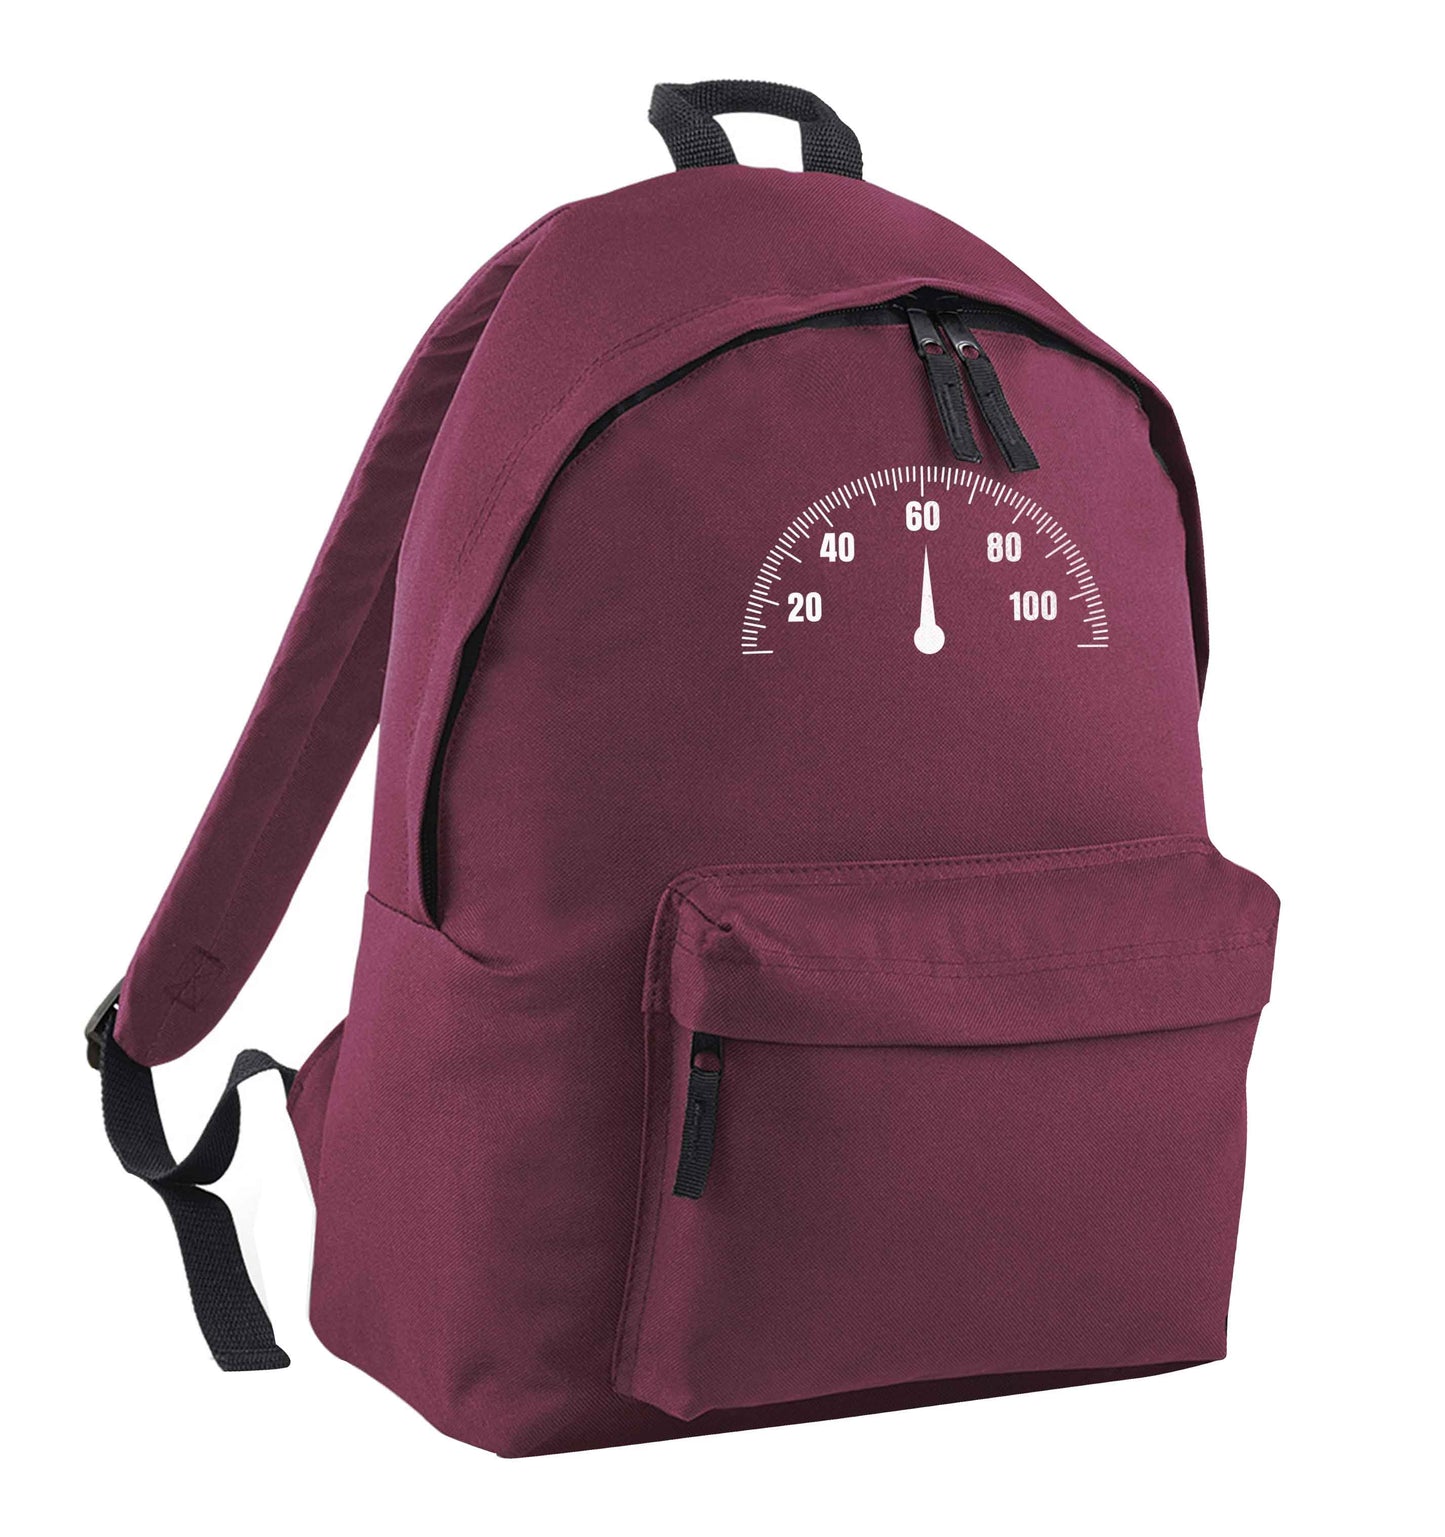 Speed dial 60 maroon adults backpack